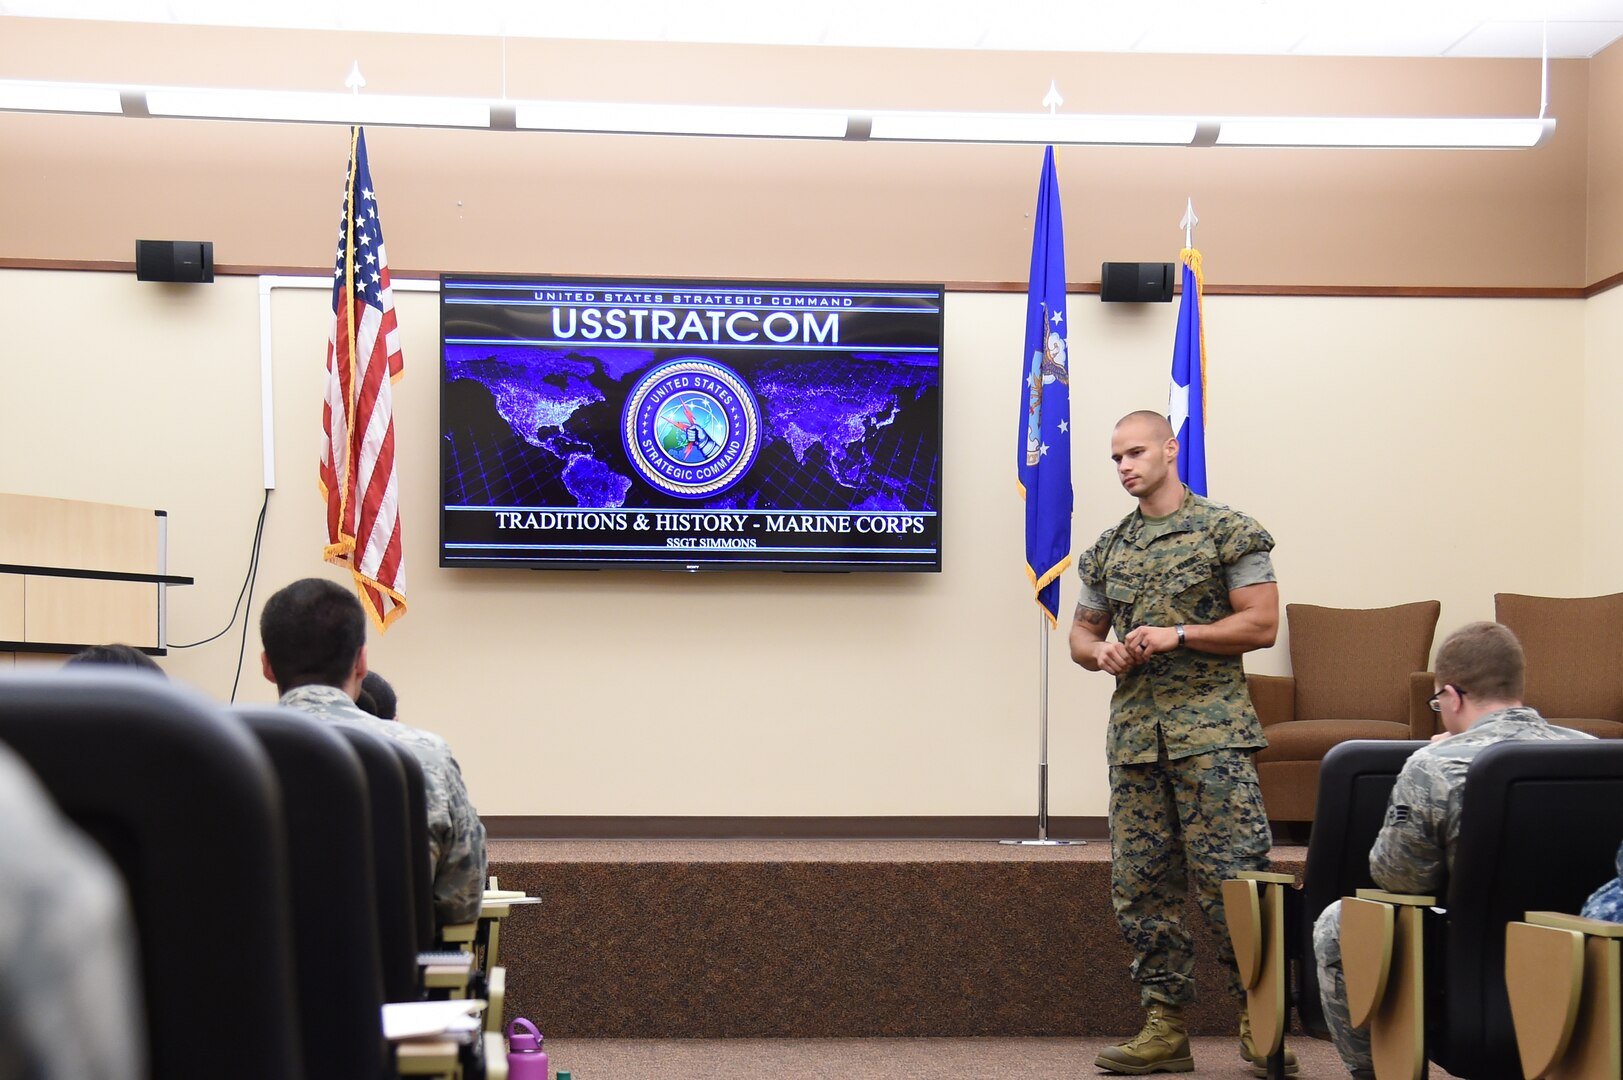 U.S. Marine Corps Staff Sgt. Jacob Simmons, U.S. Strategic Command (USSTRATCOM) Global Operations Center warning systems controller, teaches Offutt Air Force Base, Neb., junior-enlisted military members about U.S. Marine Corps traditions and history during the inaugural Junior Enlisted Professional Development Seminar, July 19, 2018. During the seminar, junior-enlisted members discussed a variety of topics with USSTRATCOM non-commissioned officers, petty officers and senior leaders. Topics included leadership, junior-enlisted roles and responsibilities, mentoring, military traditions and history, educational benefits, and customs and courtesies. USSTRATCOM has global responsibilities assigned through the Unified Command Plan that include strategic deterrence, nuclear operations, space operations, joint electromagnetic spectrum operations, global strike, missile defense, and analysis and targeting.